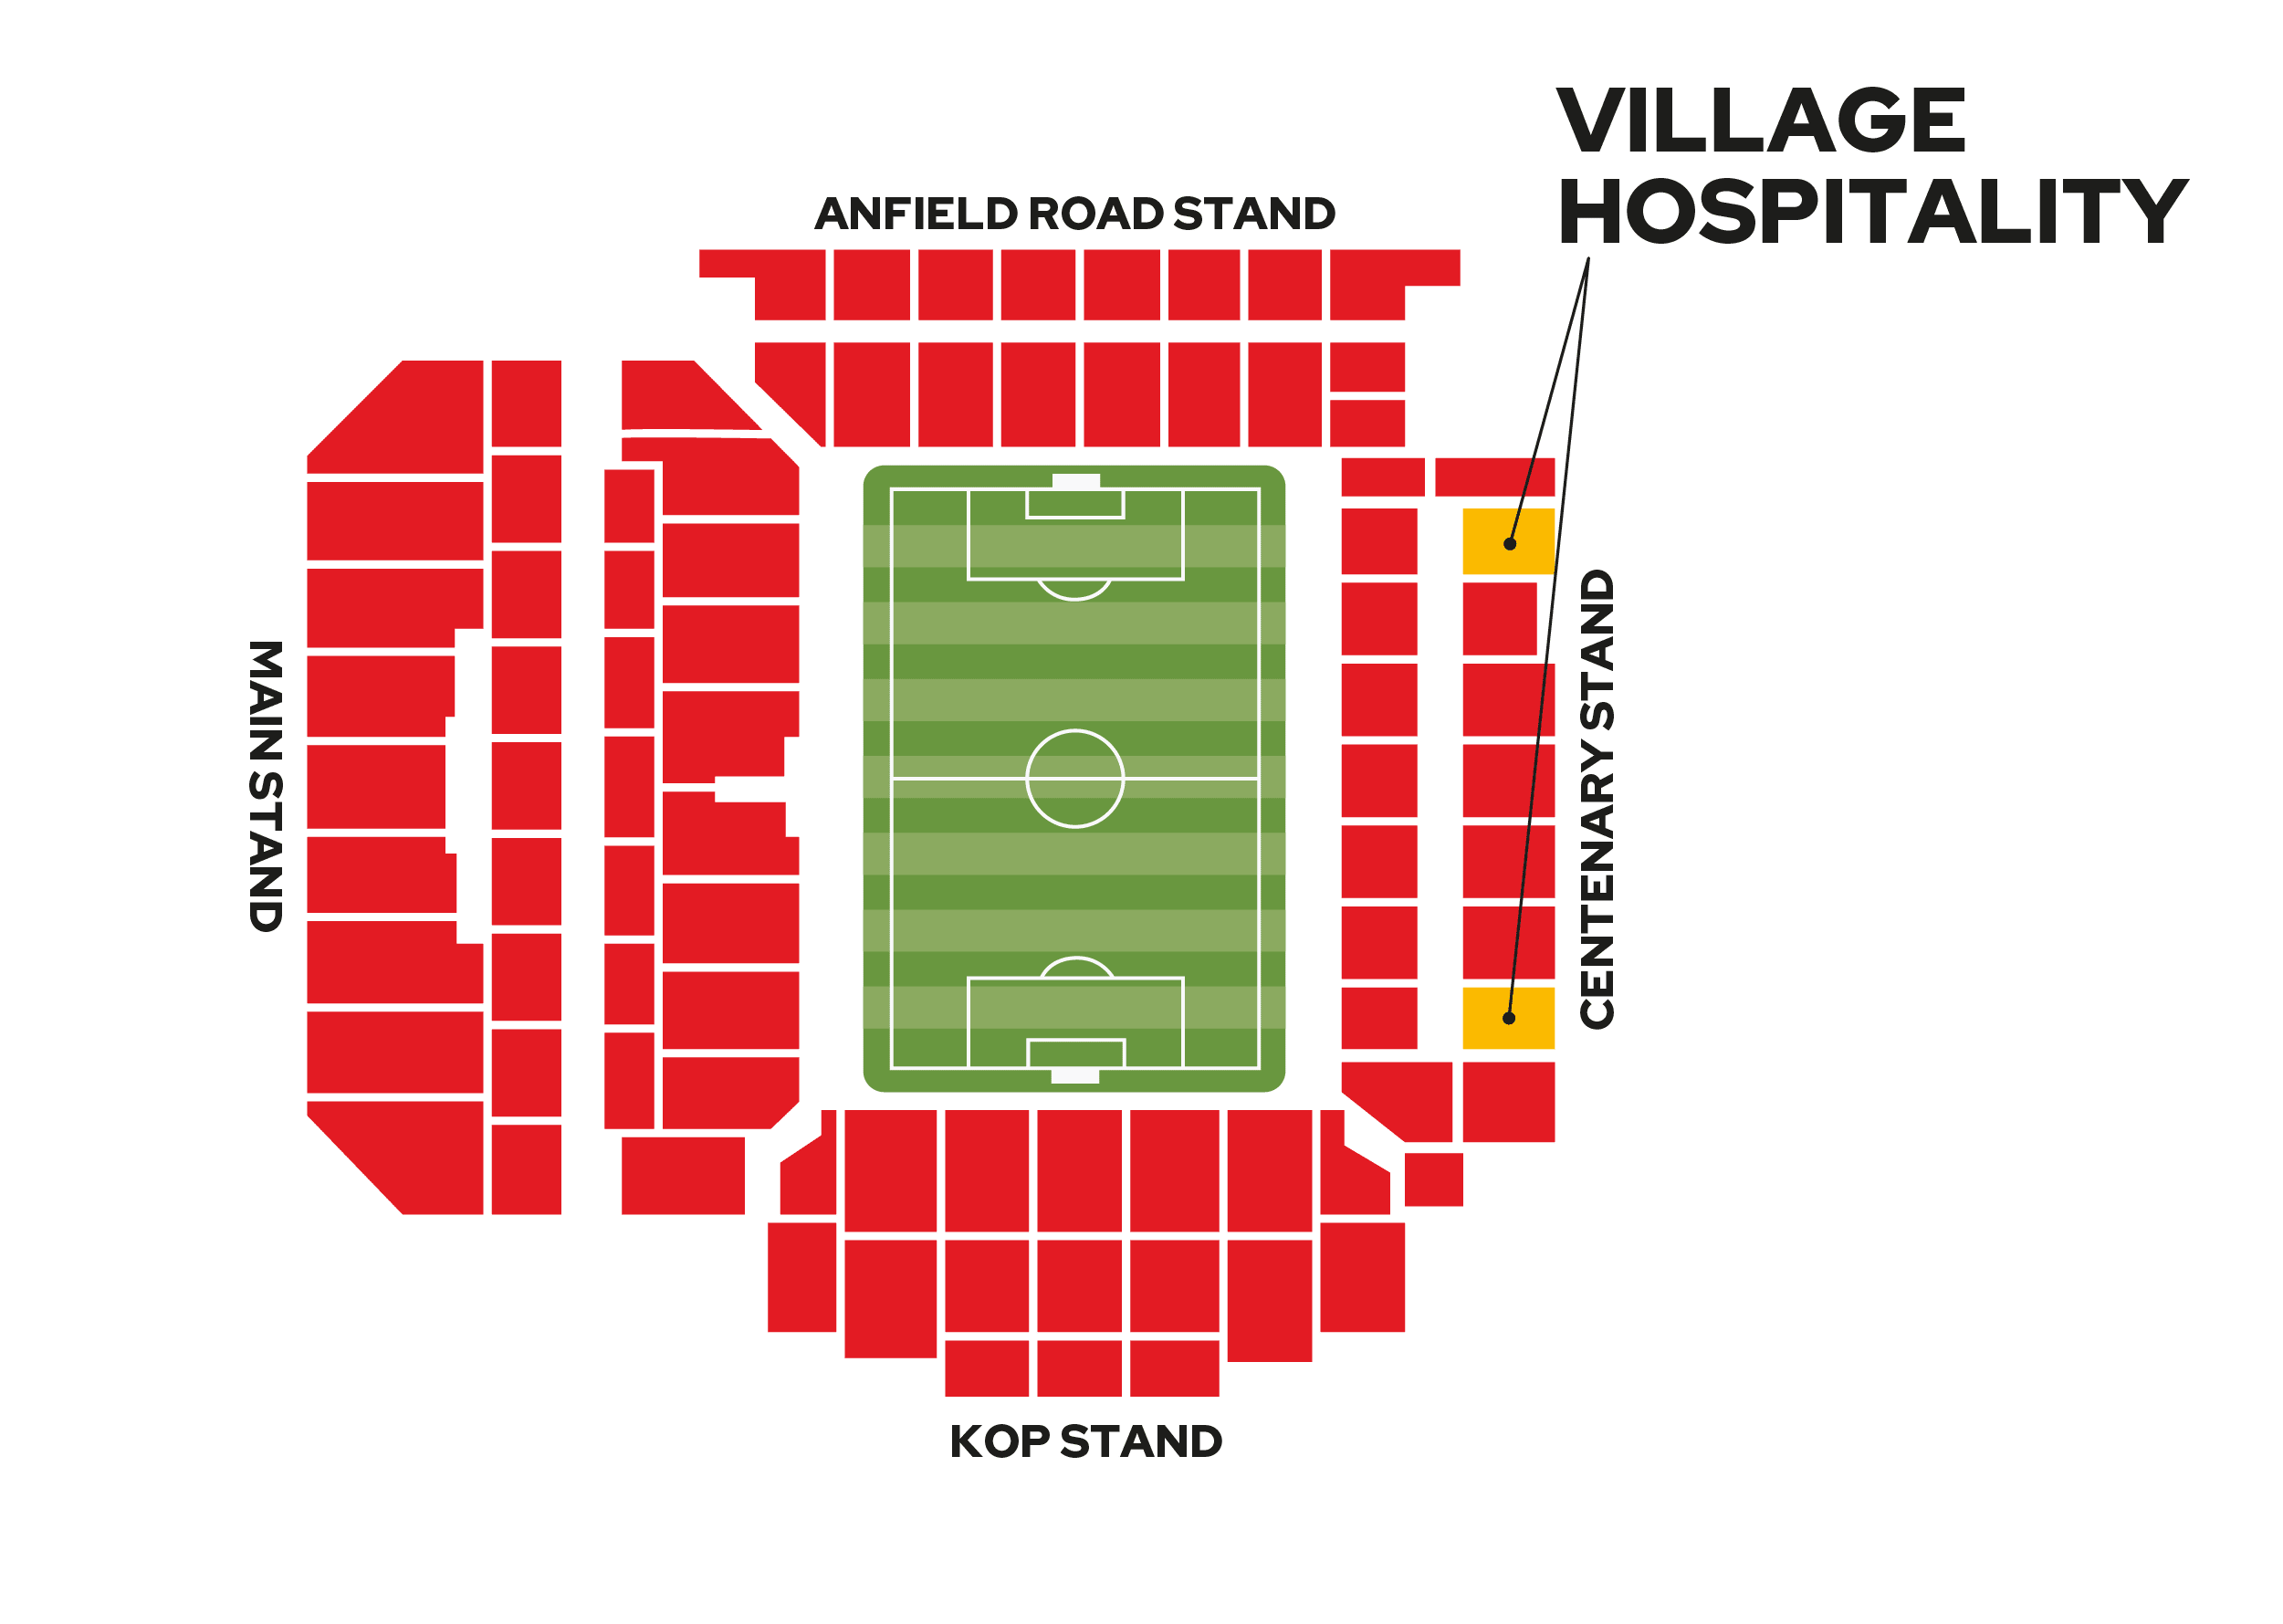 Village Hospitality seating in the Centenary Stand at Anfield Stadium